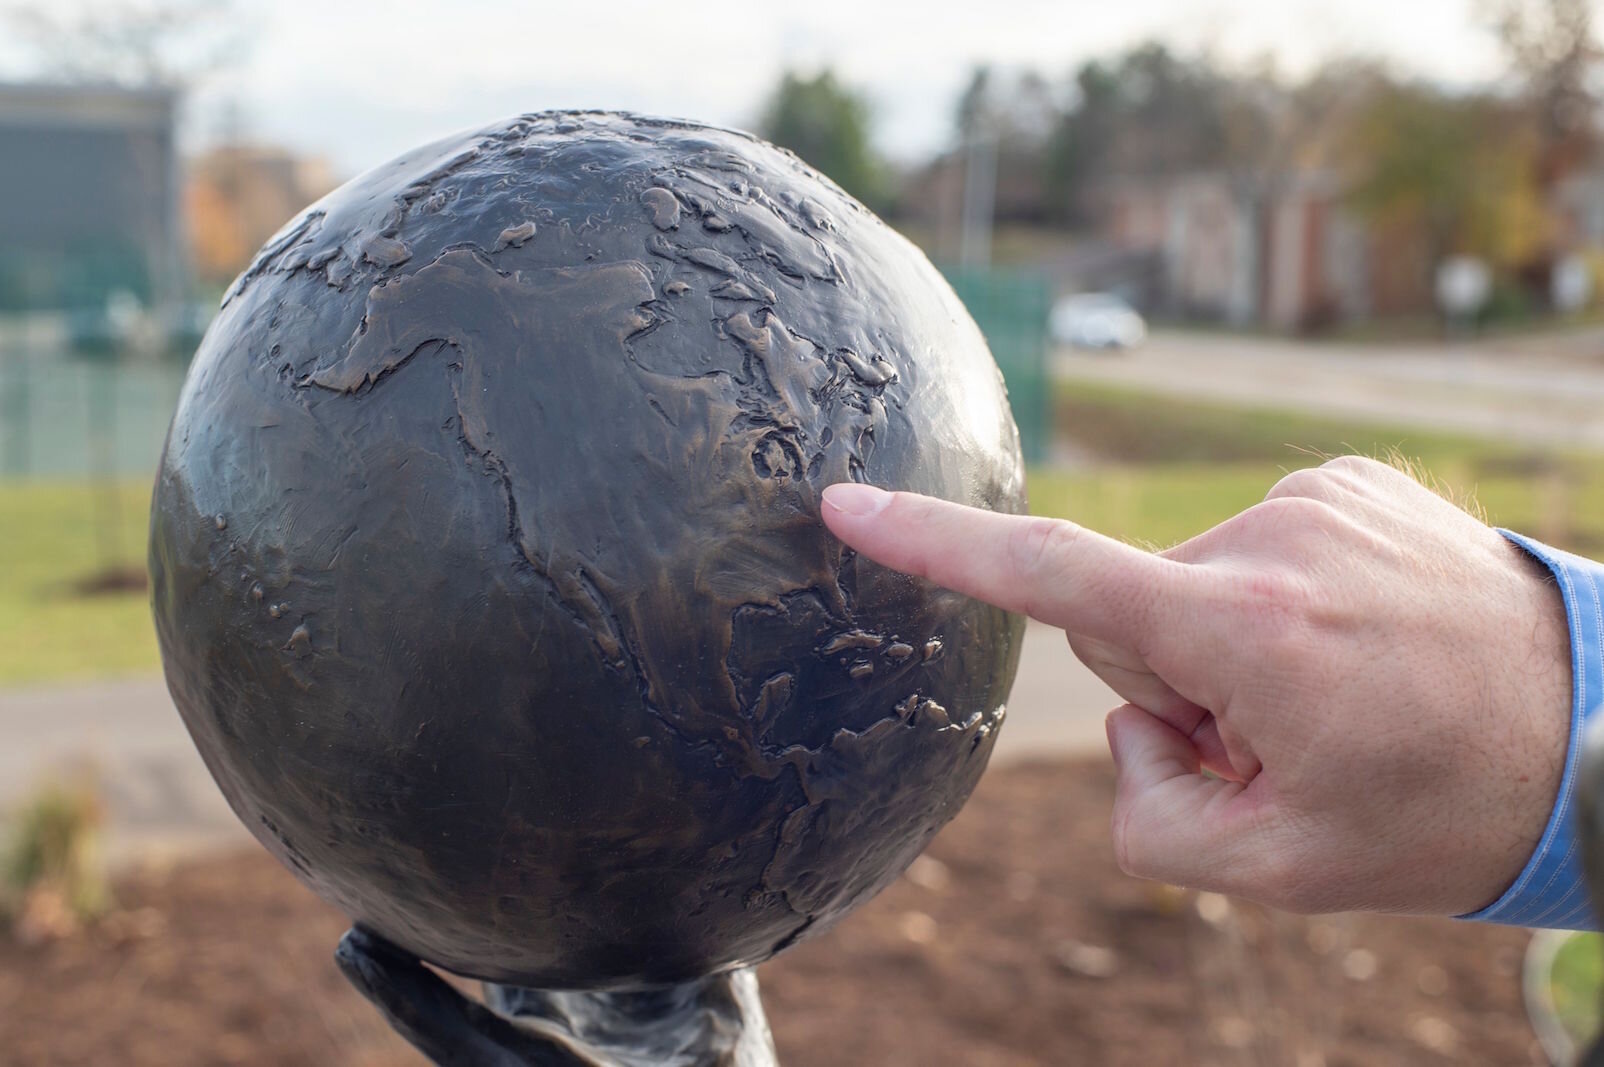 A closer look at the globe held by "Hope."